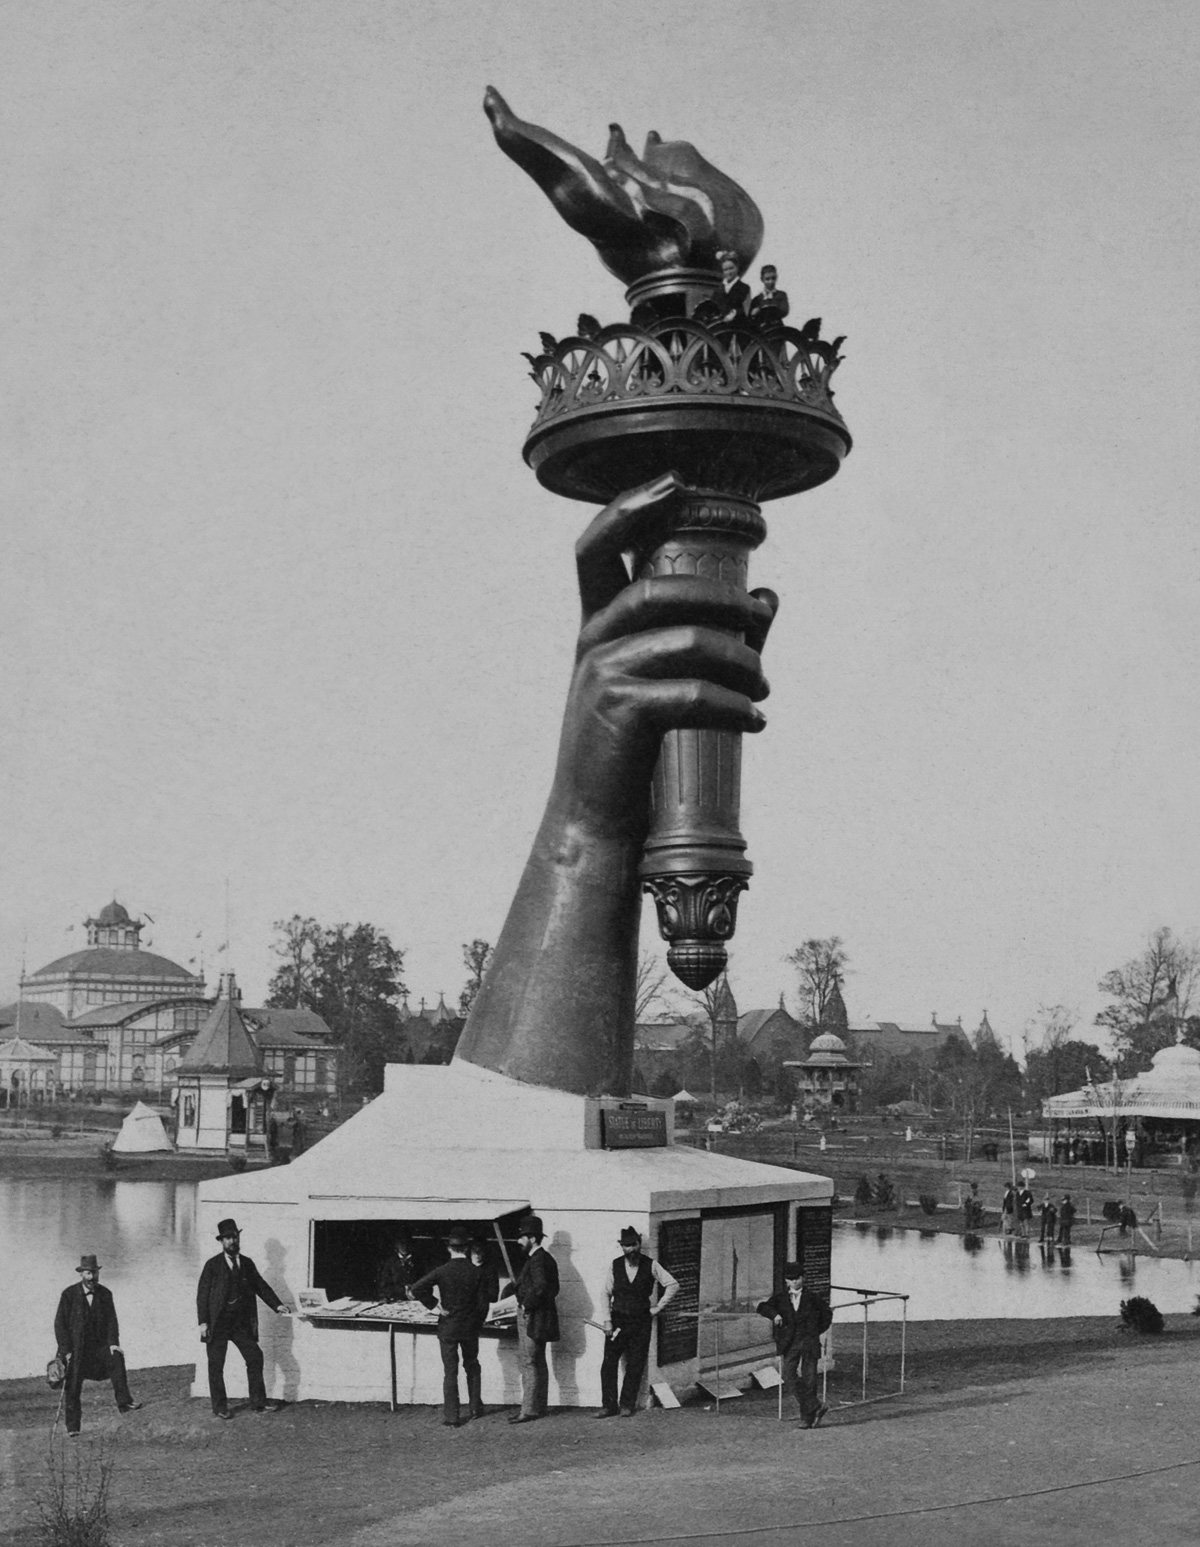 File:Statue of Liberty Arm, 1876, Phildadelphis Centennial Exposition  BW.jpg - Wikimedia Commons